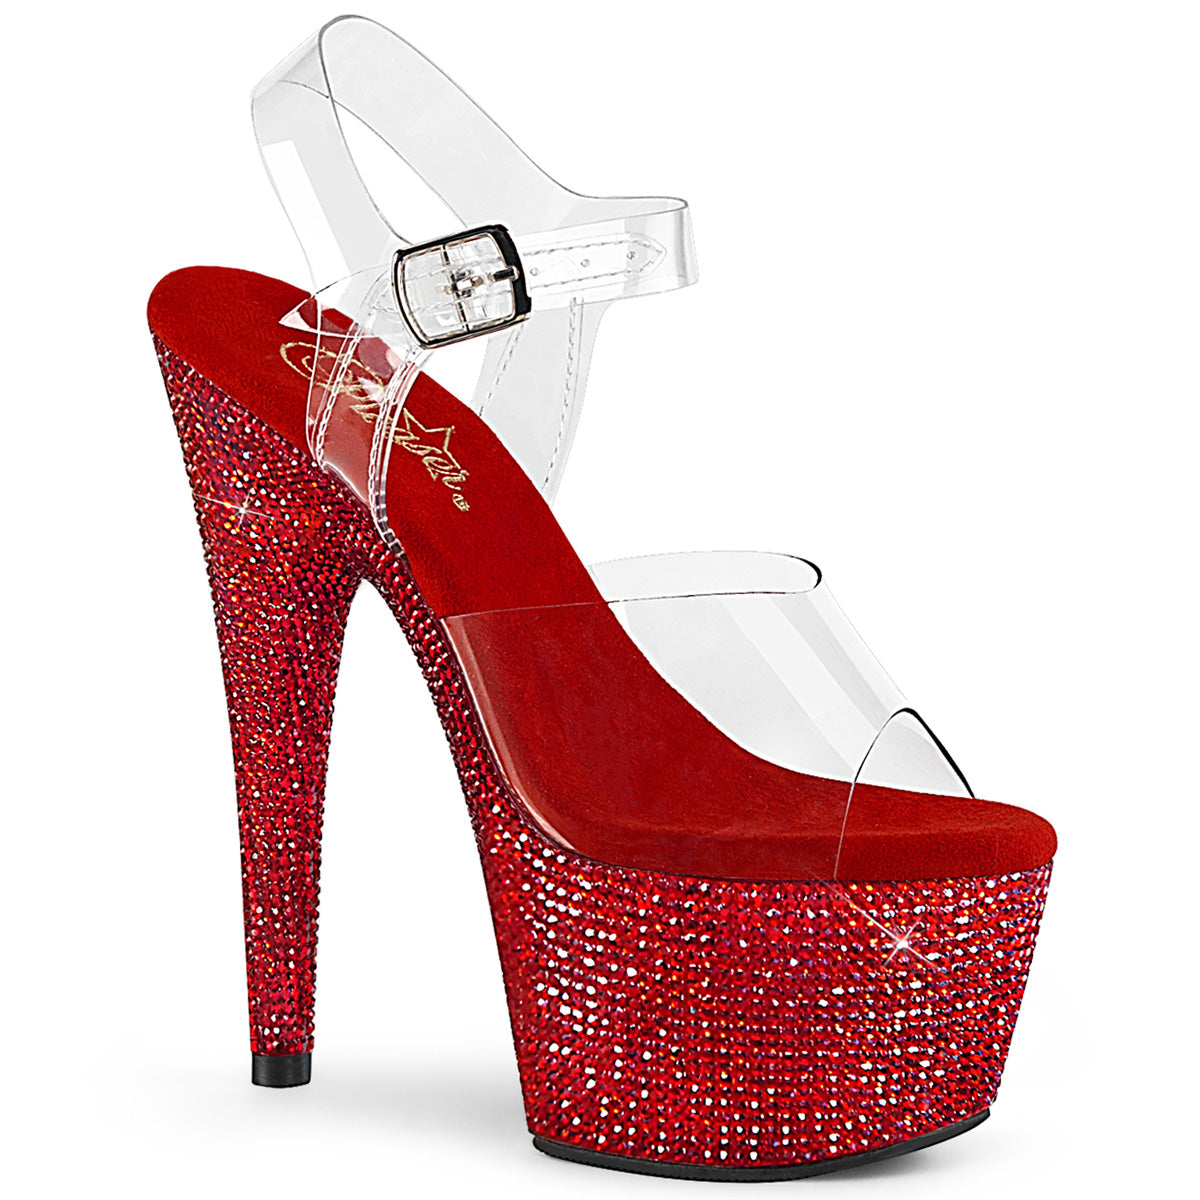 Pleaser Womens Sandals BEJEWELED-708DM Clr/Red RS